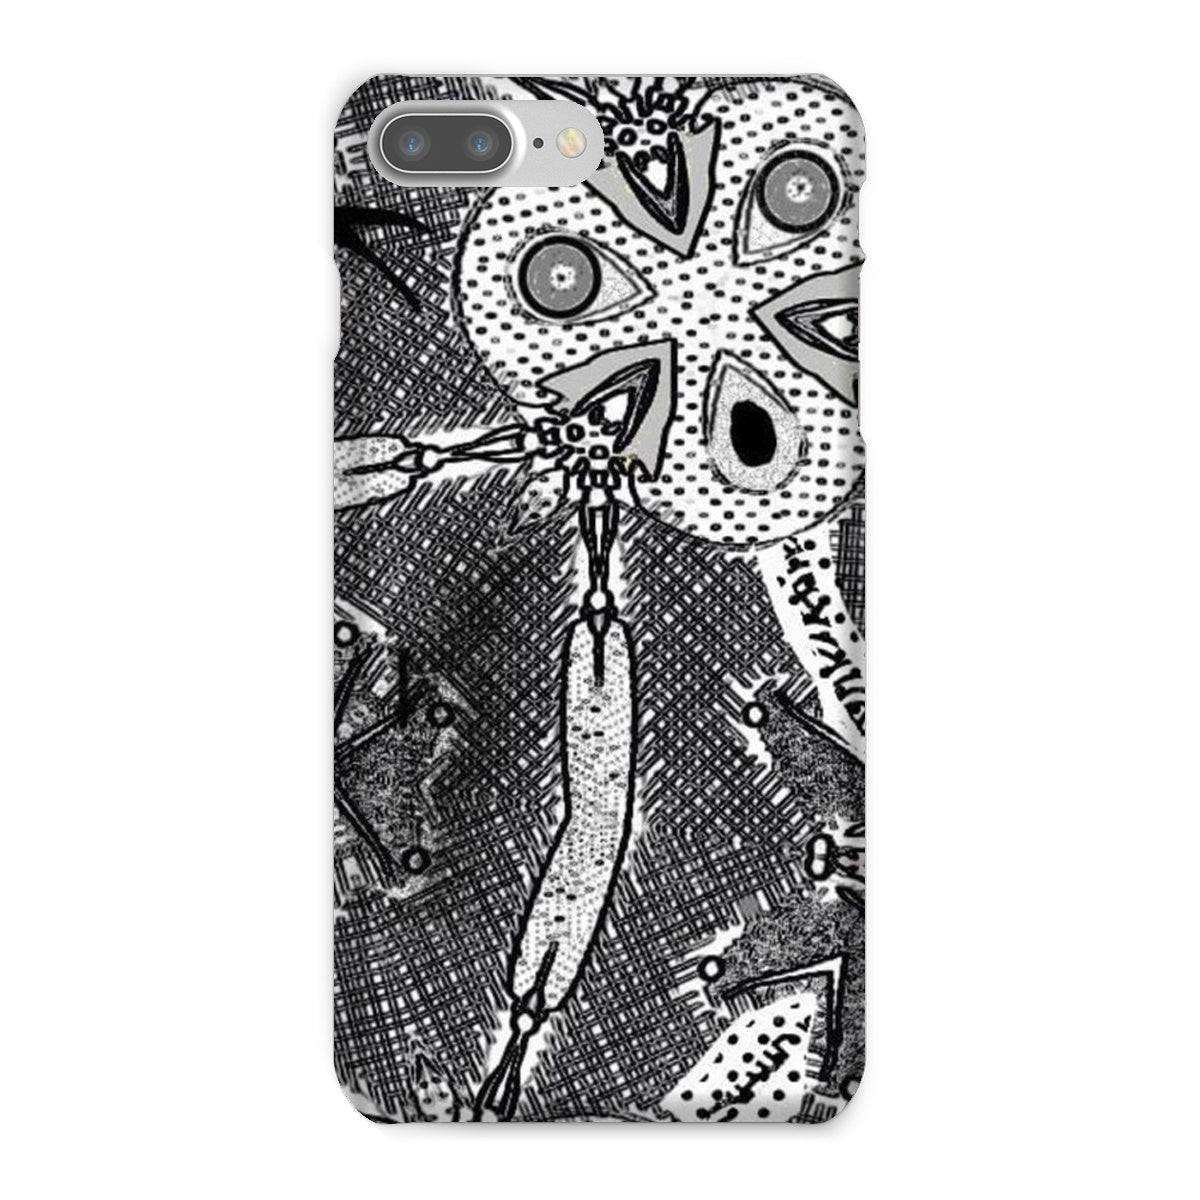 Snakes Snap Phone Case